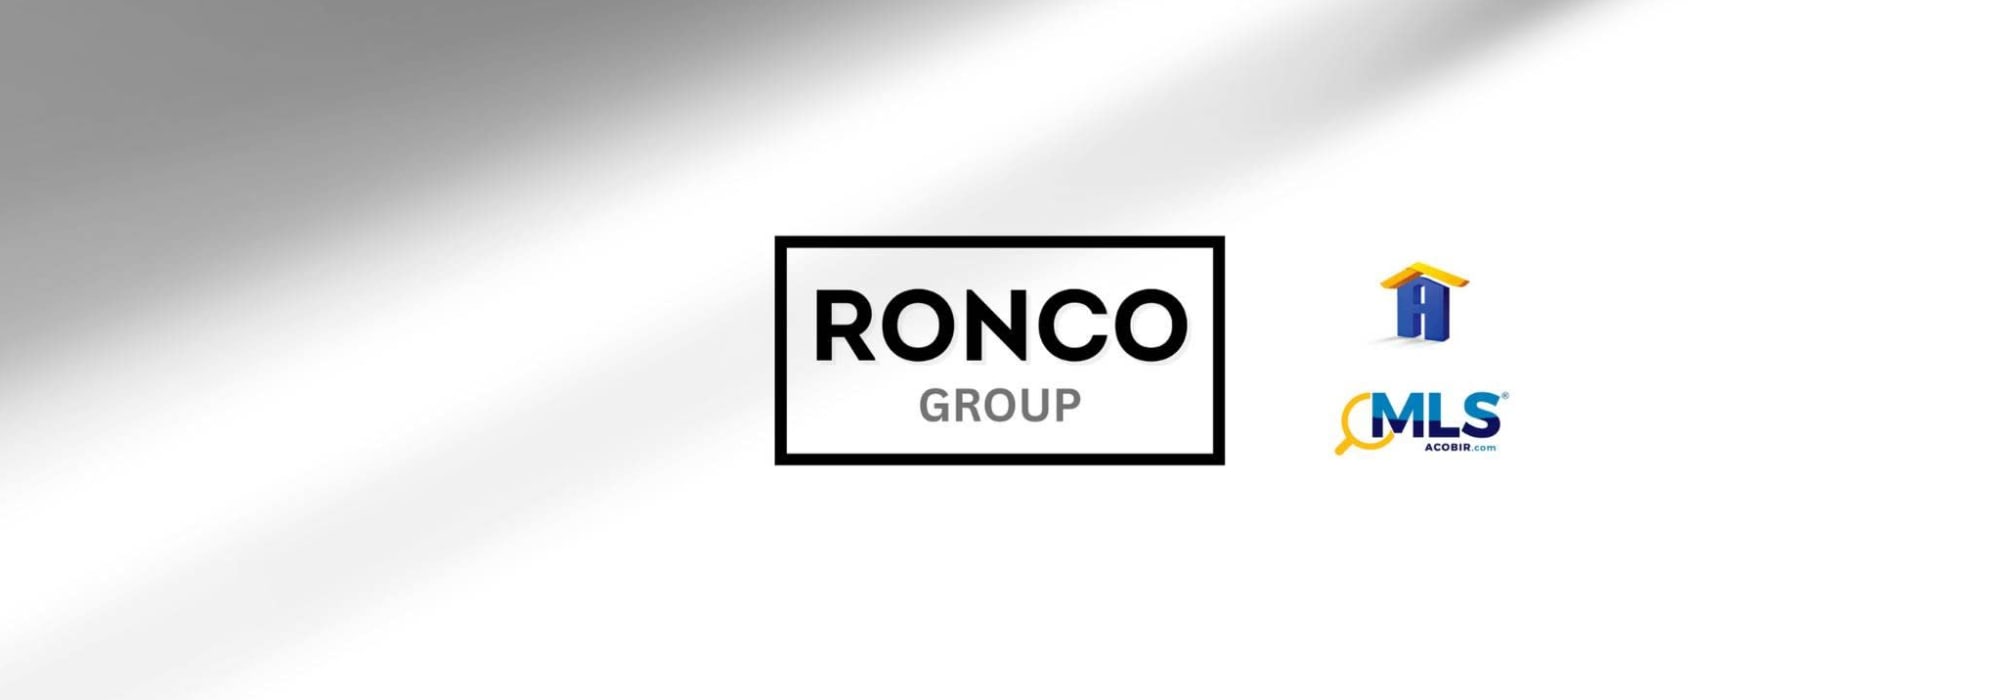 RONCO GROUP